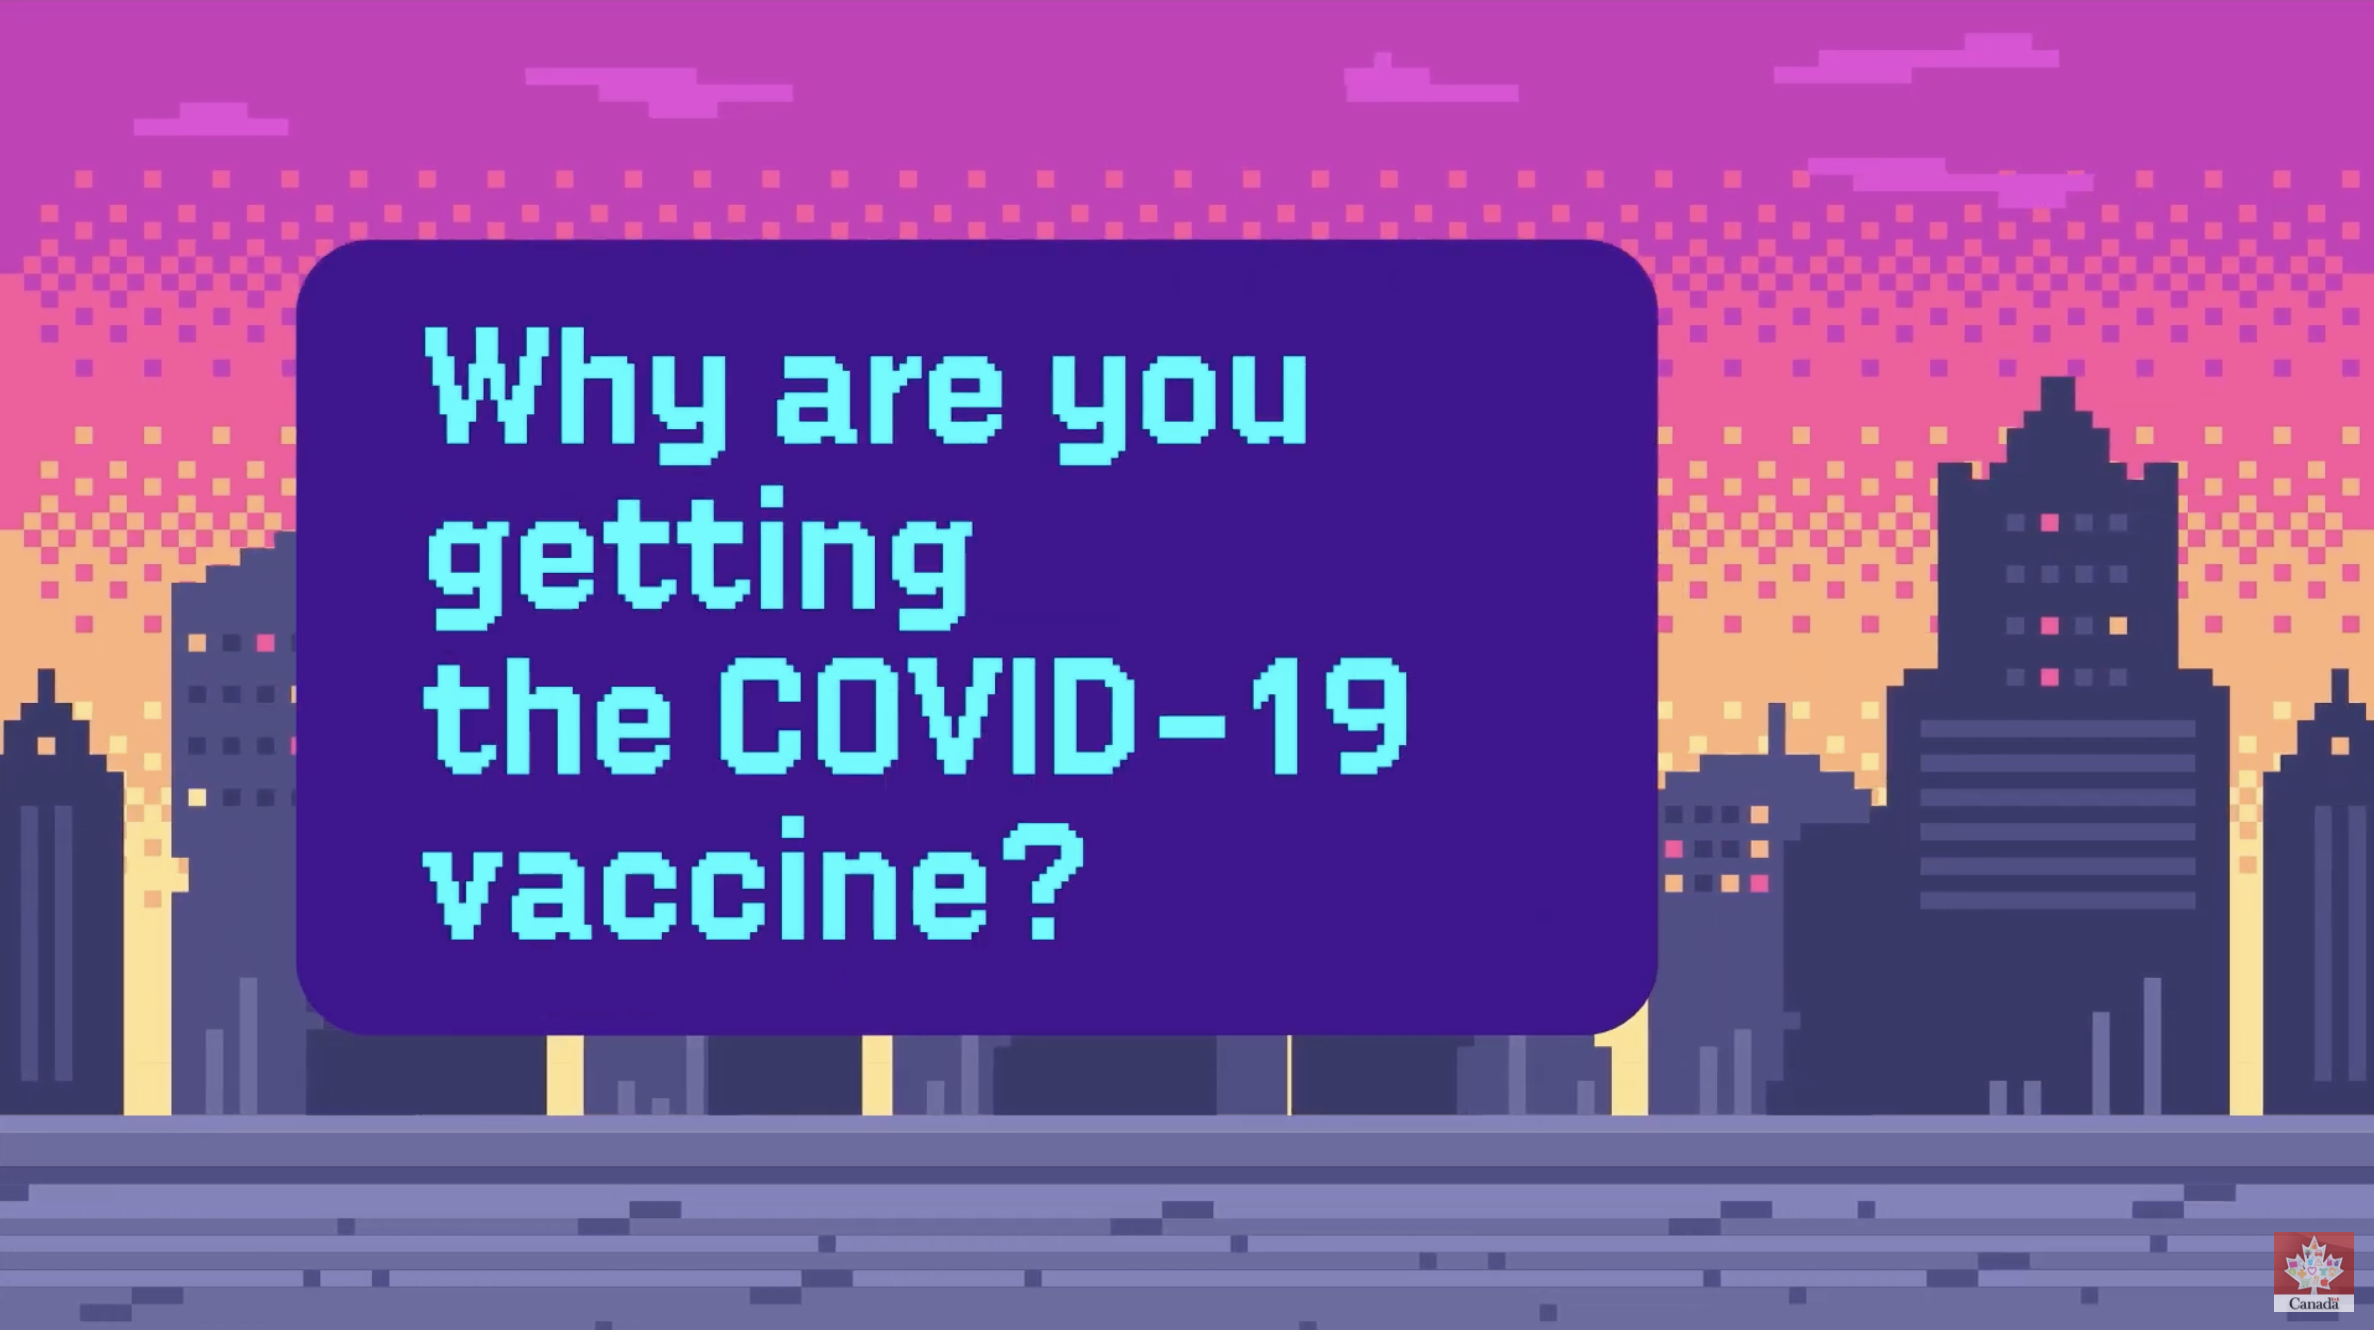 “My Why” on getting the COVID-19 vaccine: Canadian video game industry